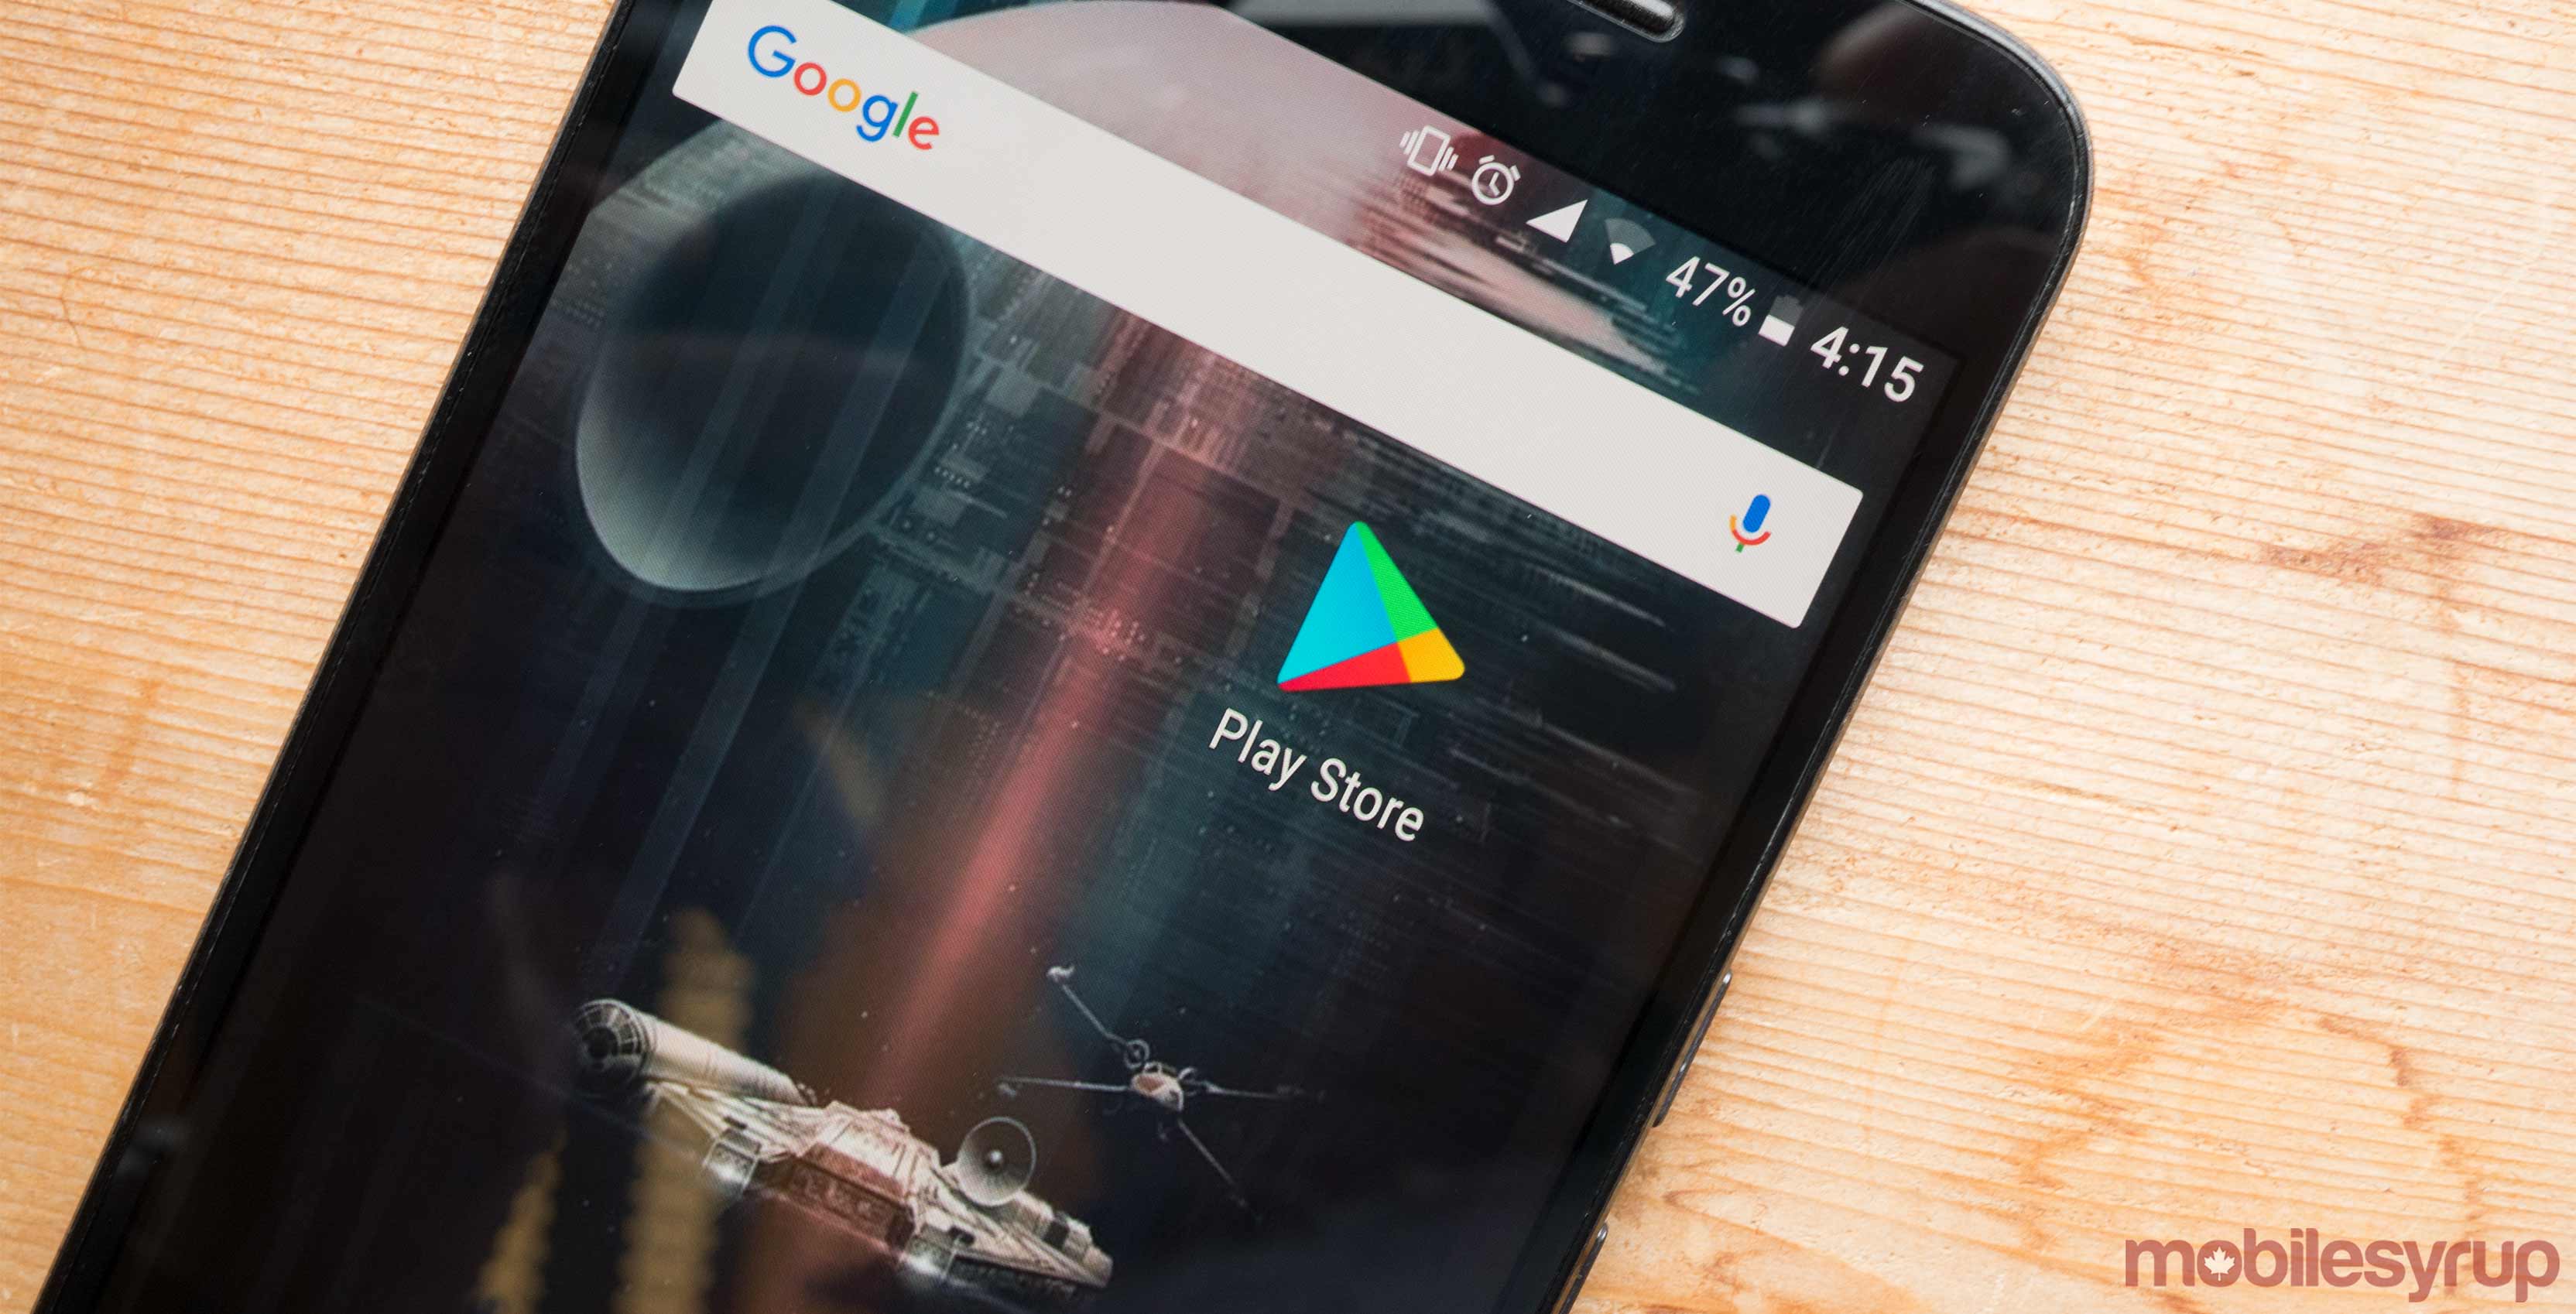 An image showcasing the Google Play Store app icon